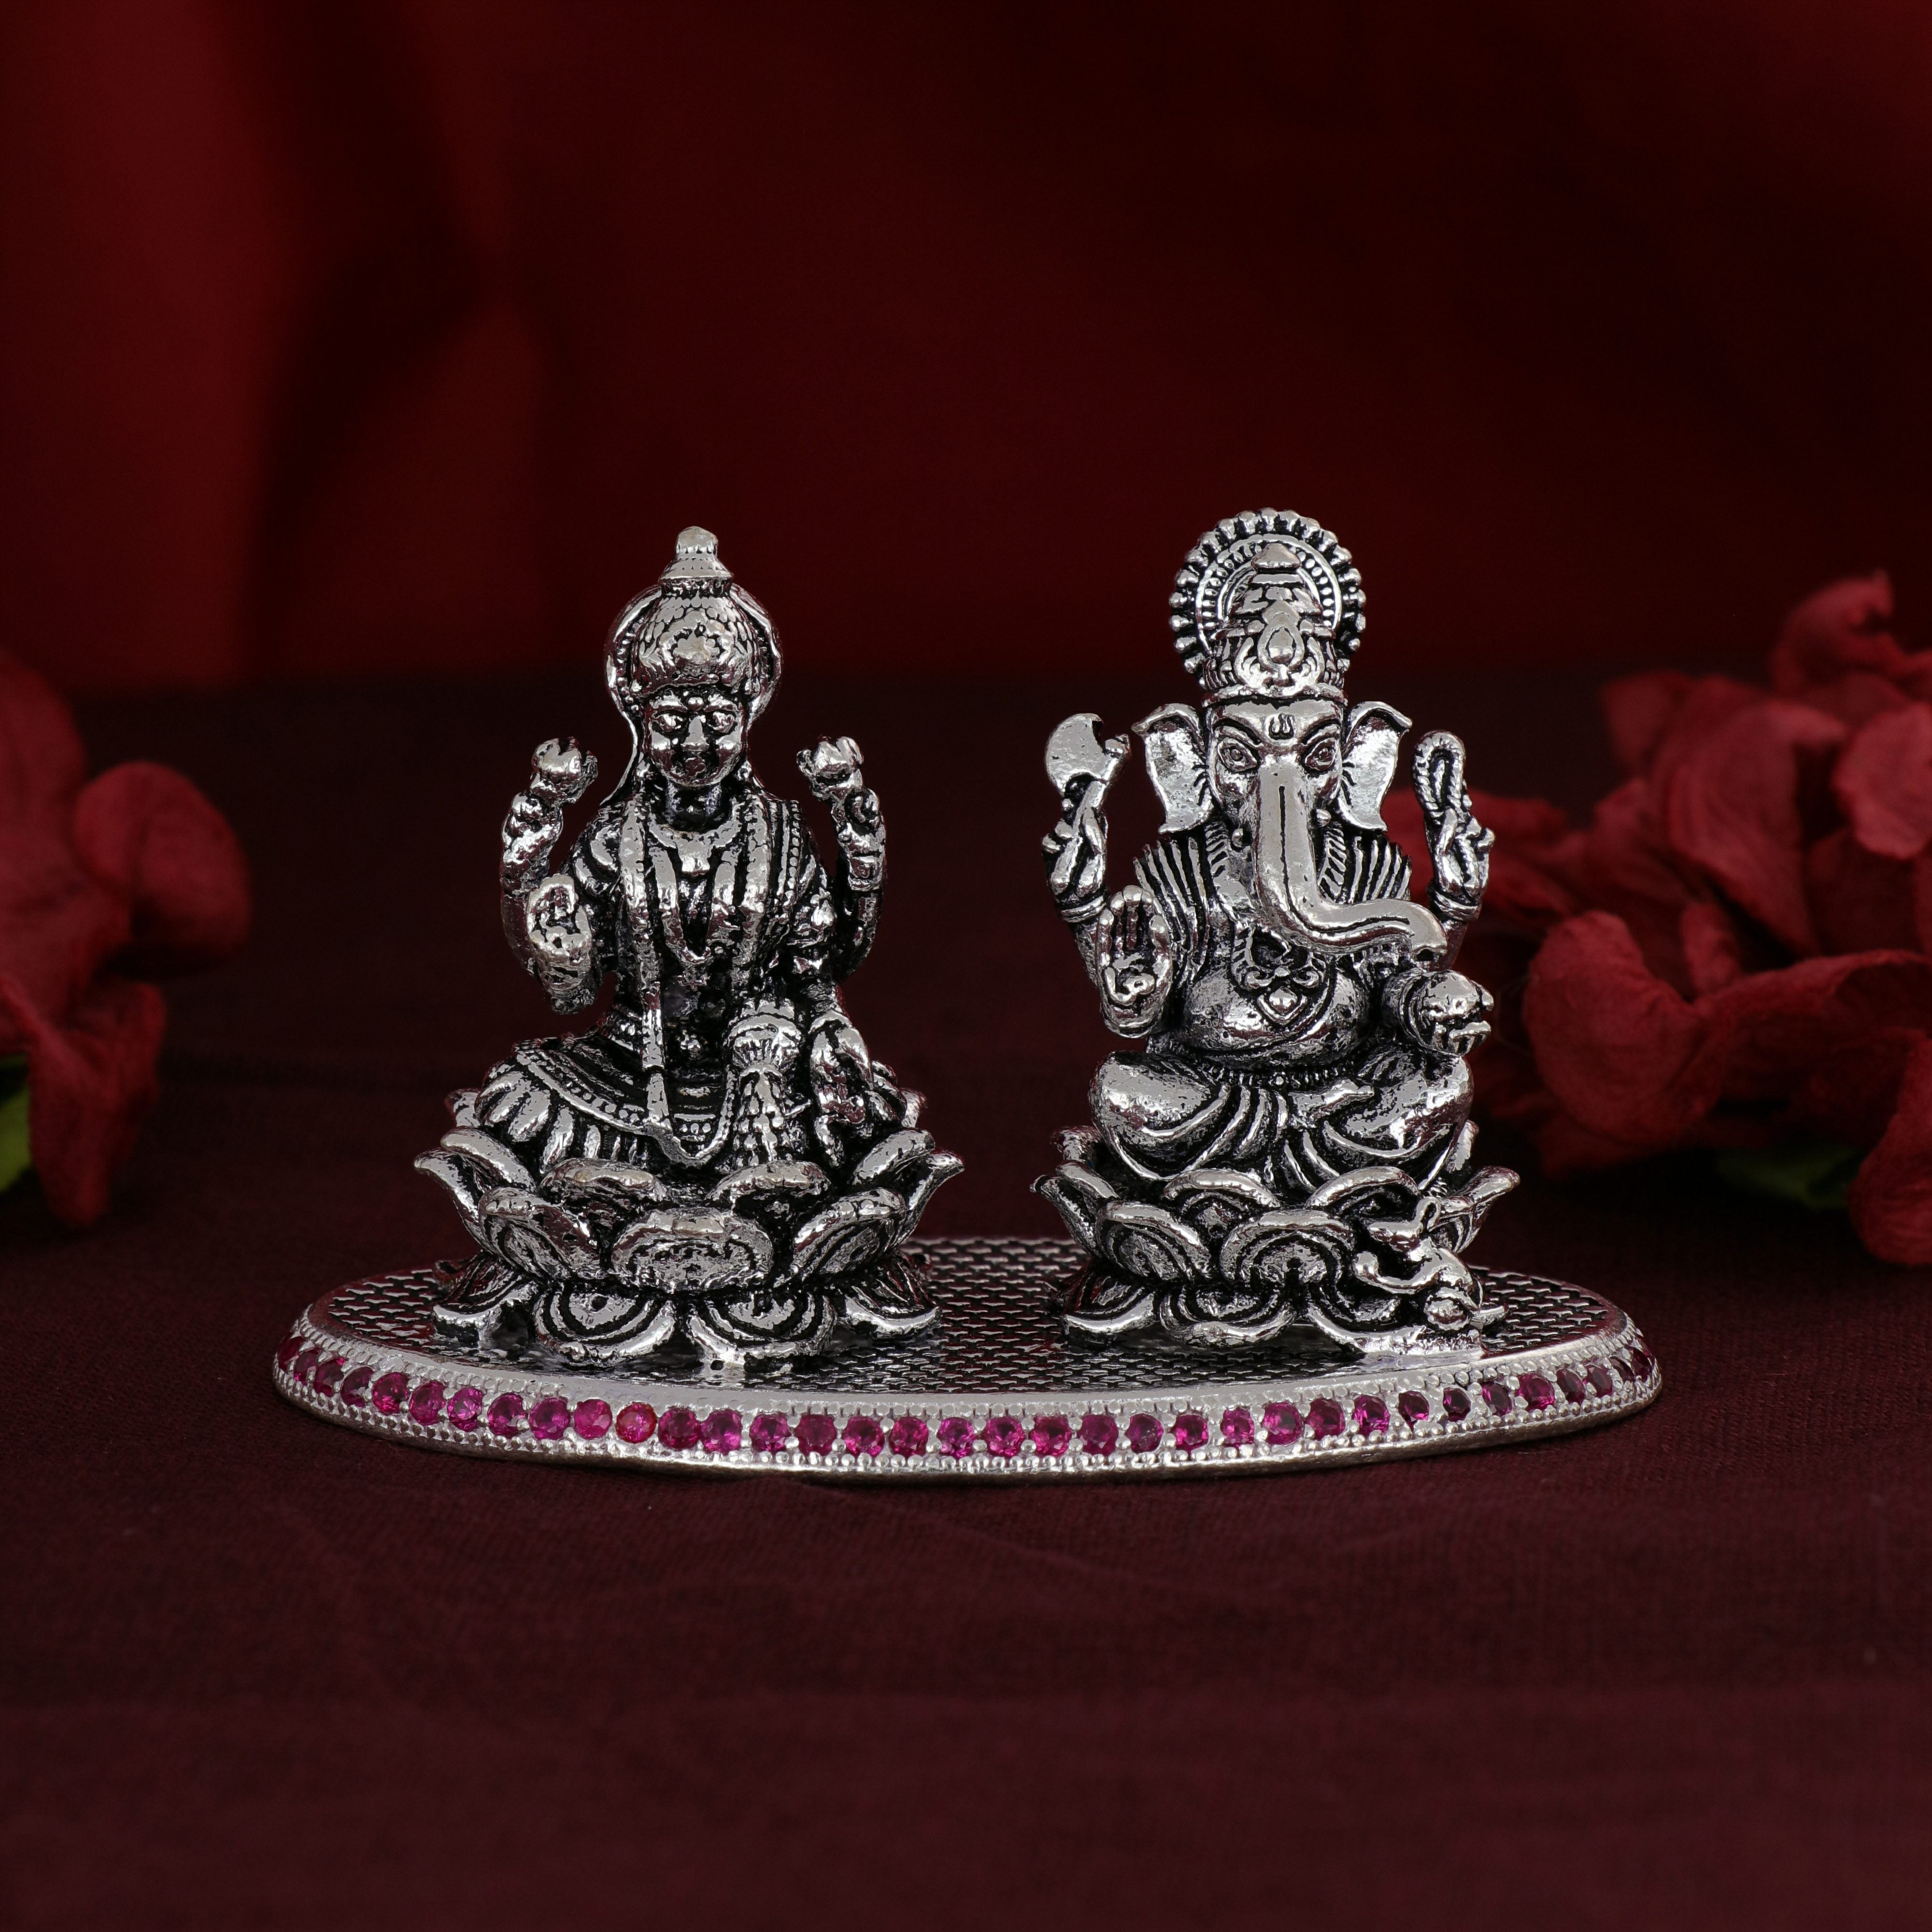 Shri Ganesh Laxmiji Silver Murti adorned with delicate pink stones